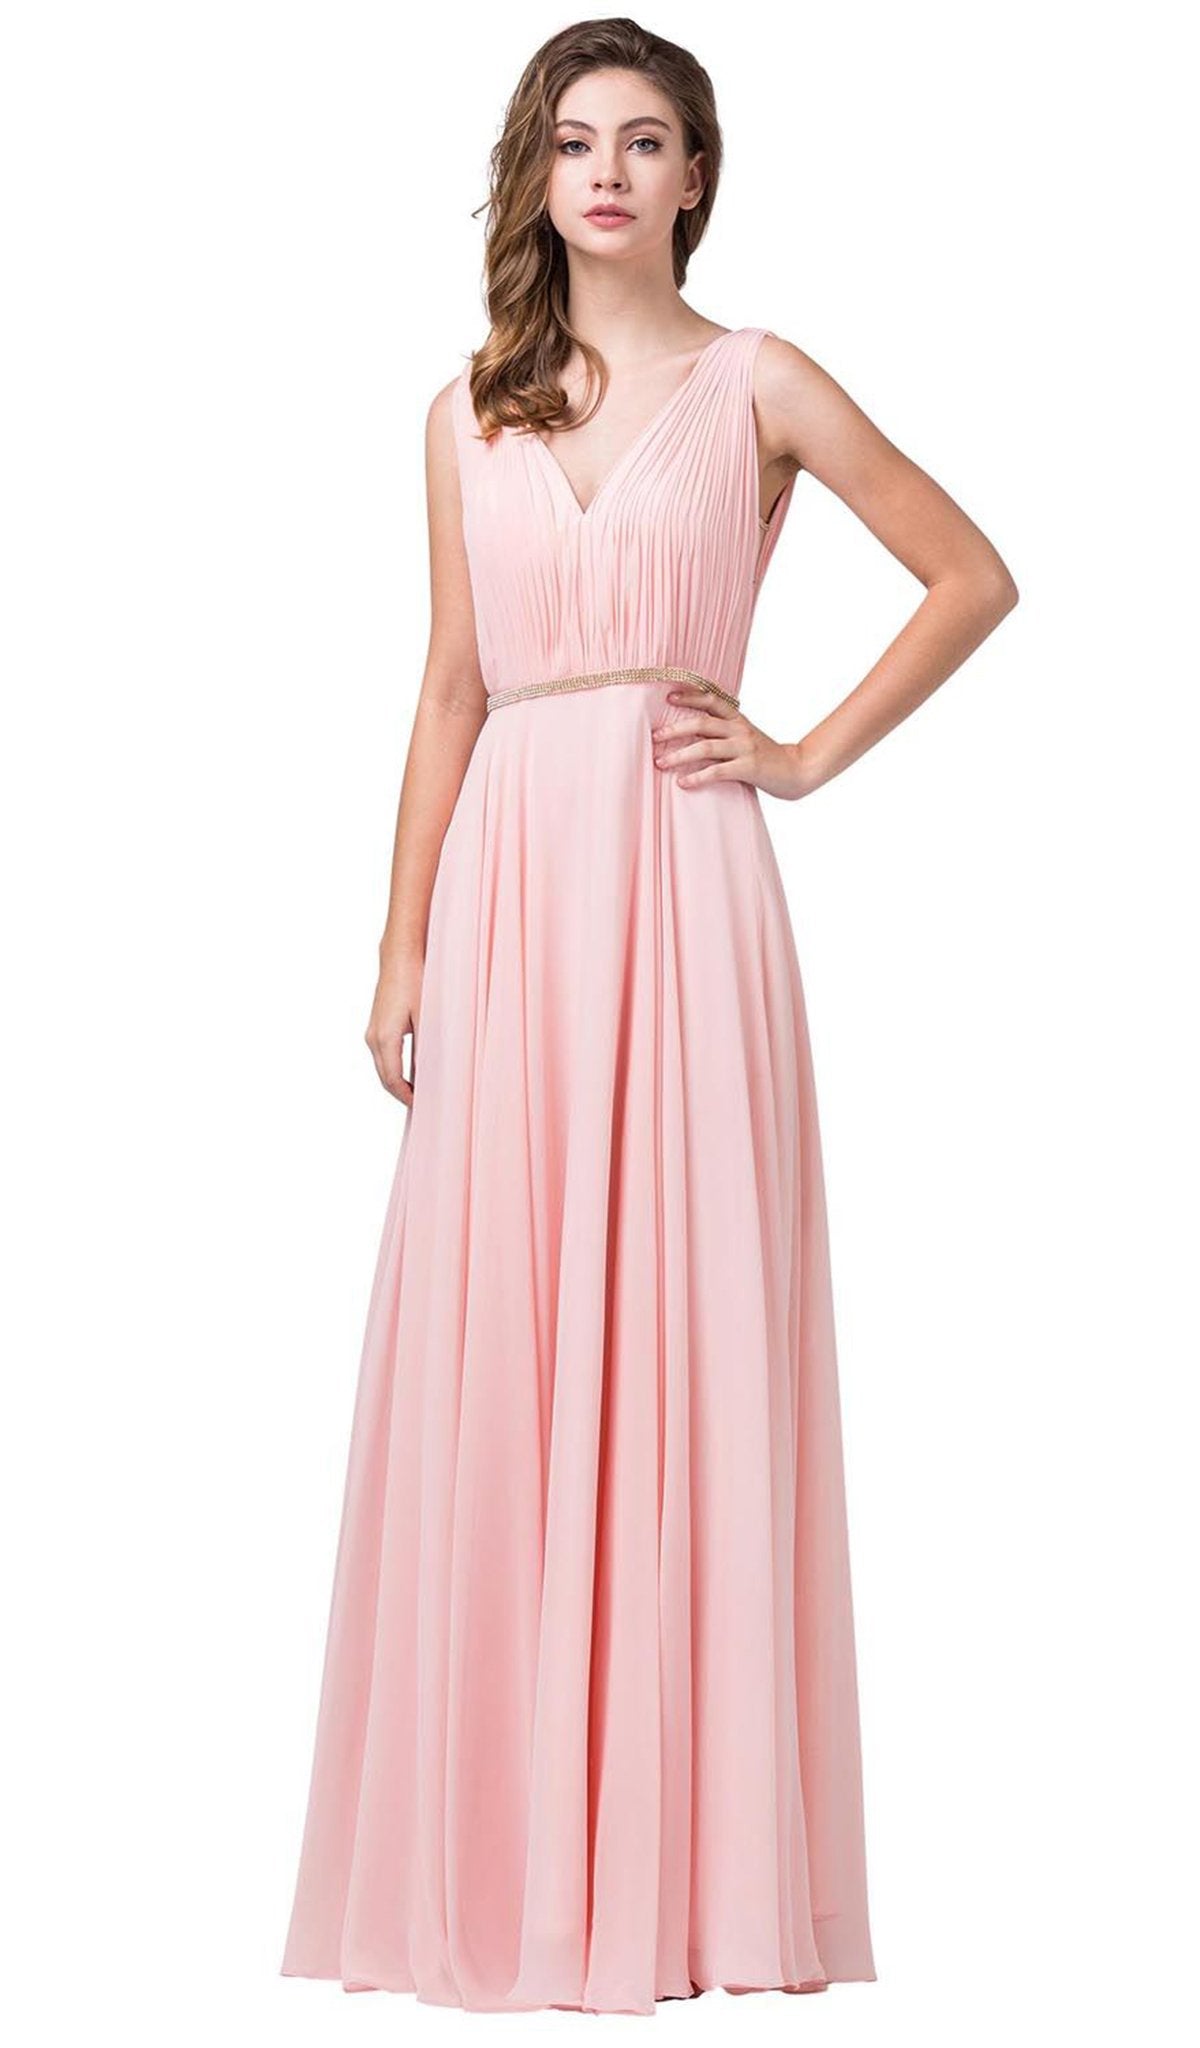 Dancing Queen - 2588 Ruched Bodice A-Line Gown with Rhinestone Belt In Pink